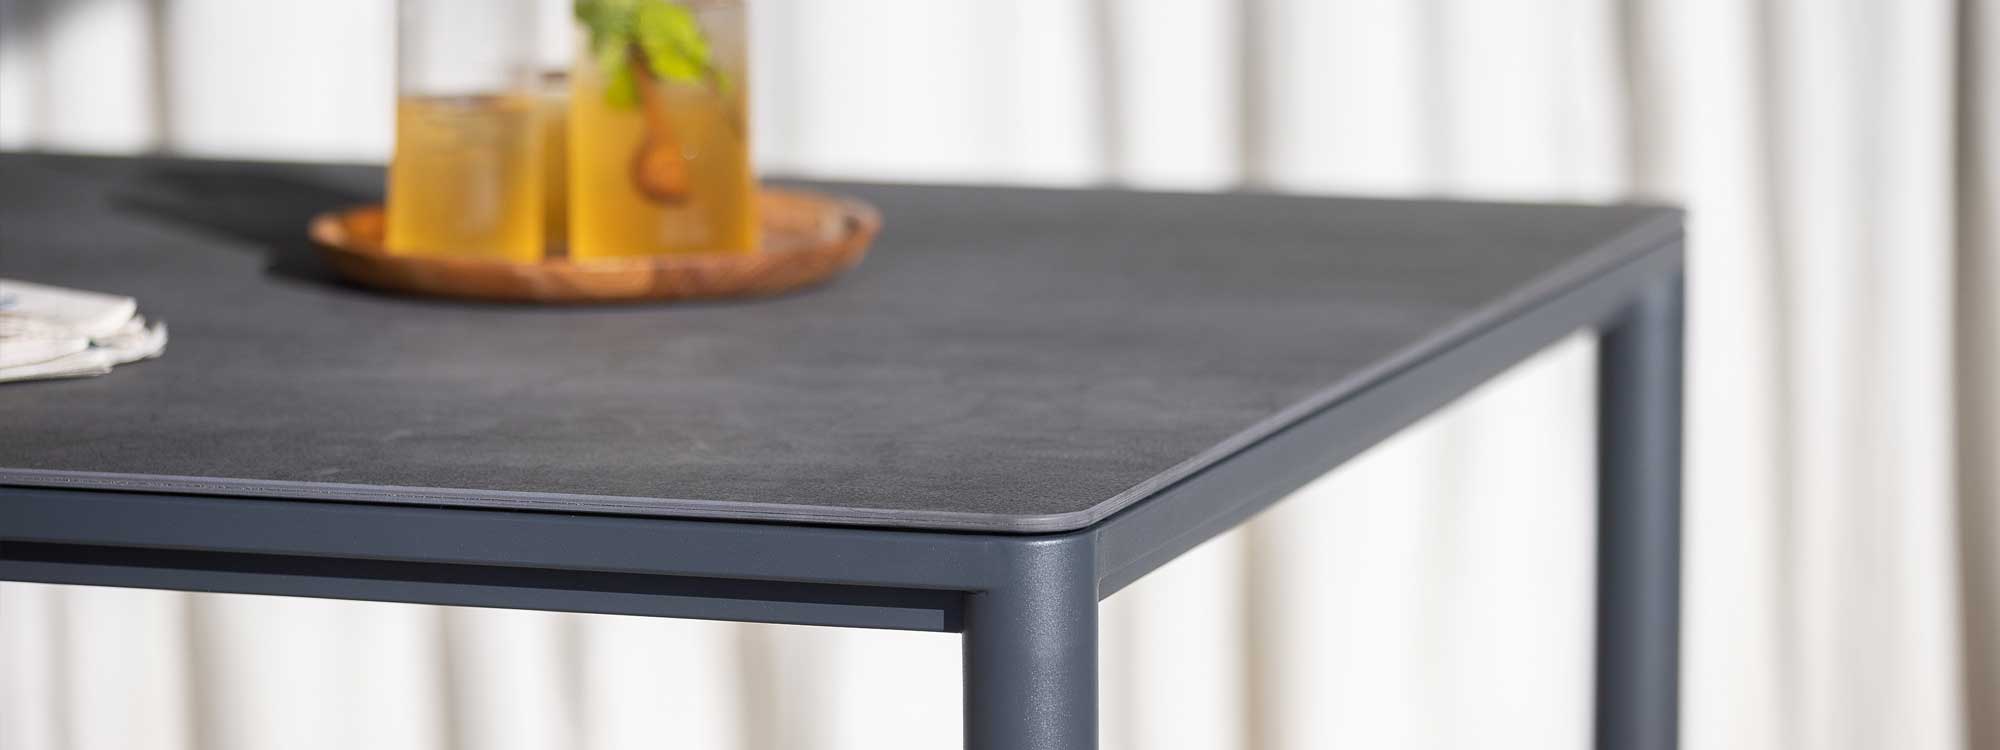 Image of detail of Alca garden table's slender frame and legs in powder coated stainless steel and ceramic table top